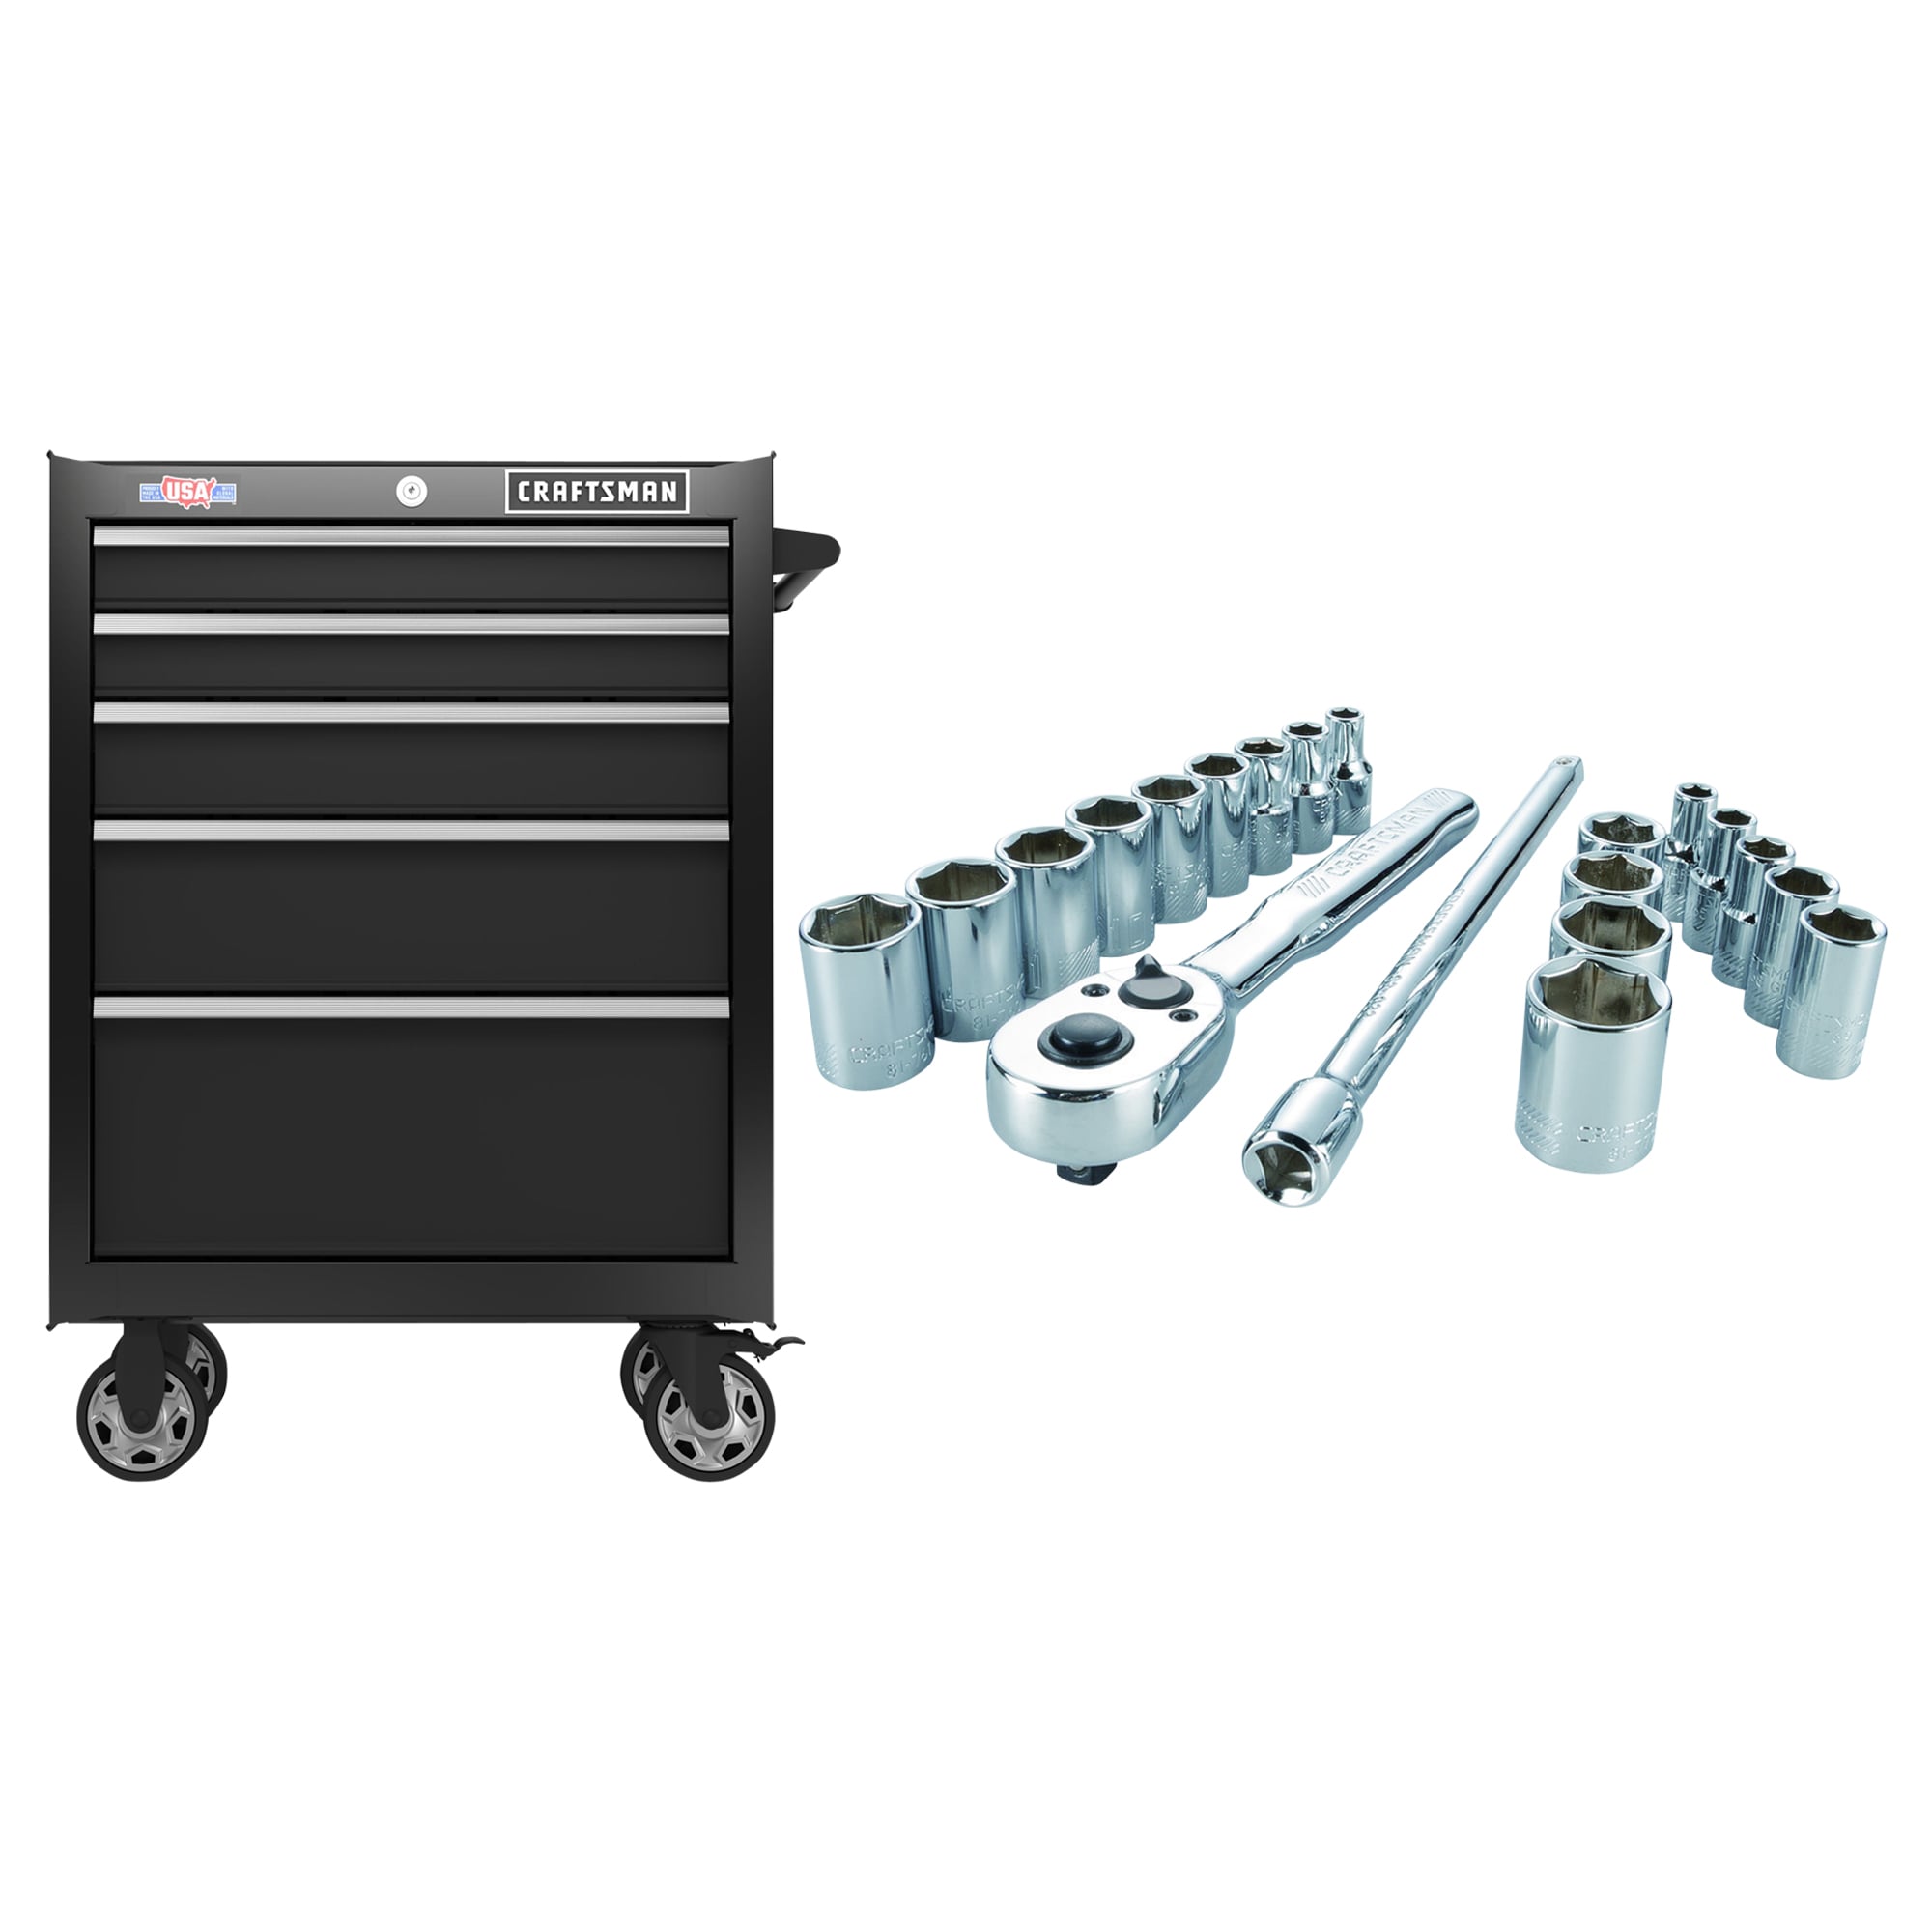 CRAFTSMAN 2000 Series 26.5-in W x 37.5-in H 5-Drawer Steel Rolling Tool Cabinet (Black) & 20-Piece Standard (SAE) and Metric Combination Polished